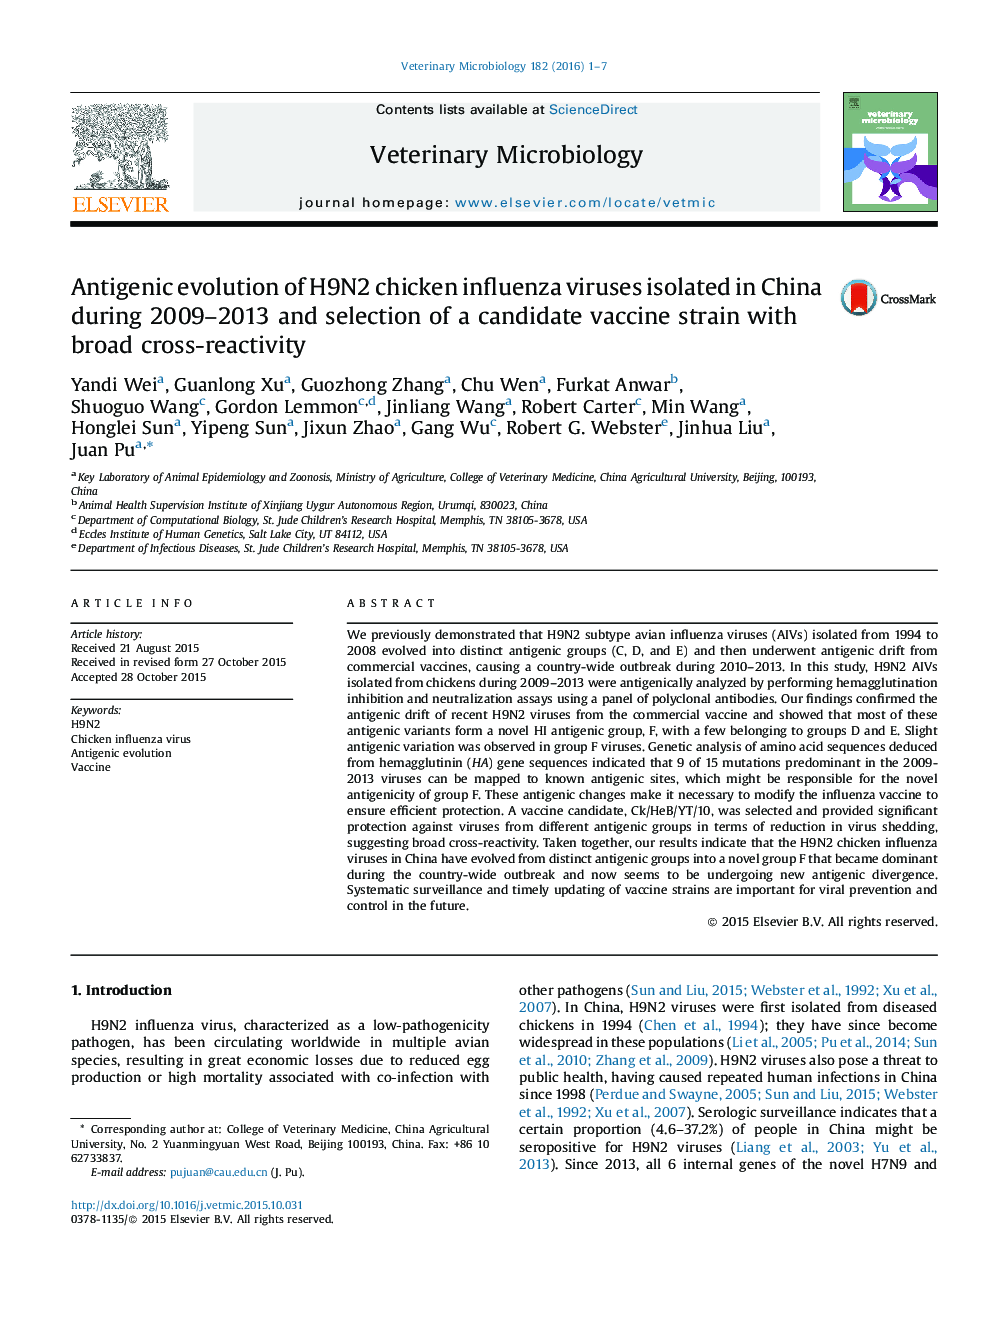 Antigenic evolution of H9N2 chicken influenza viruses isolated in China during 2009–2013 and selection of a candidate vaccine strain with broad cross-reactivity